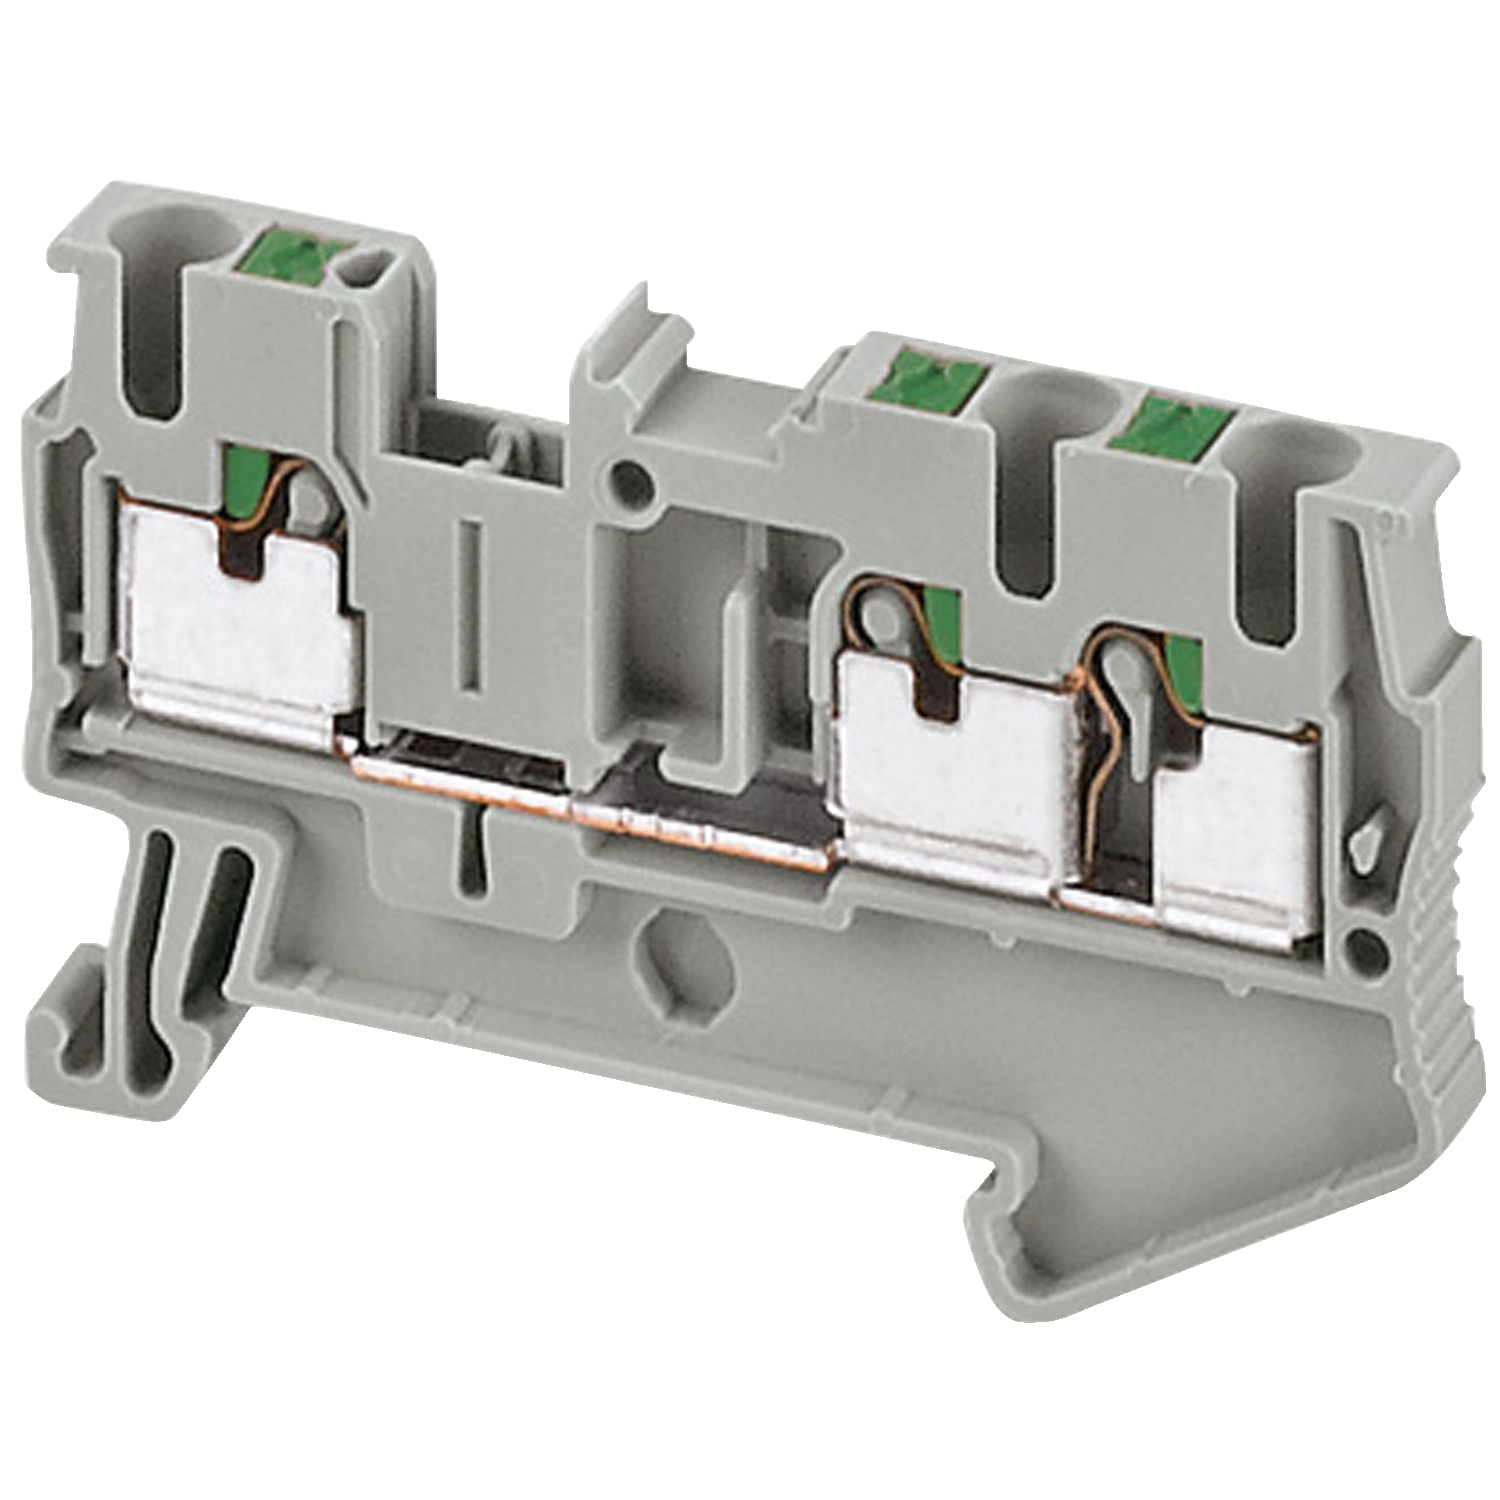 Terminal block, Linergy TR, push-in type, feed through, 3 points, 2.5mm², grey, set of 50